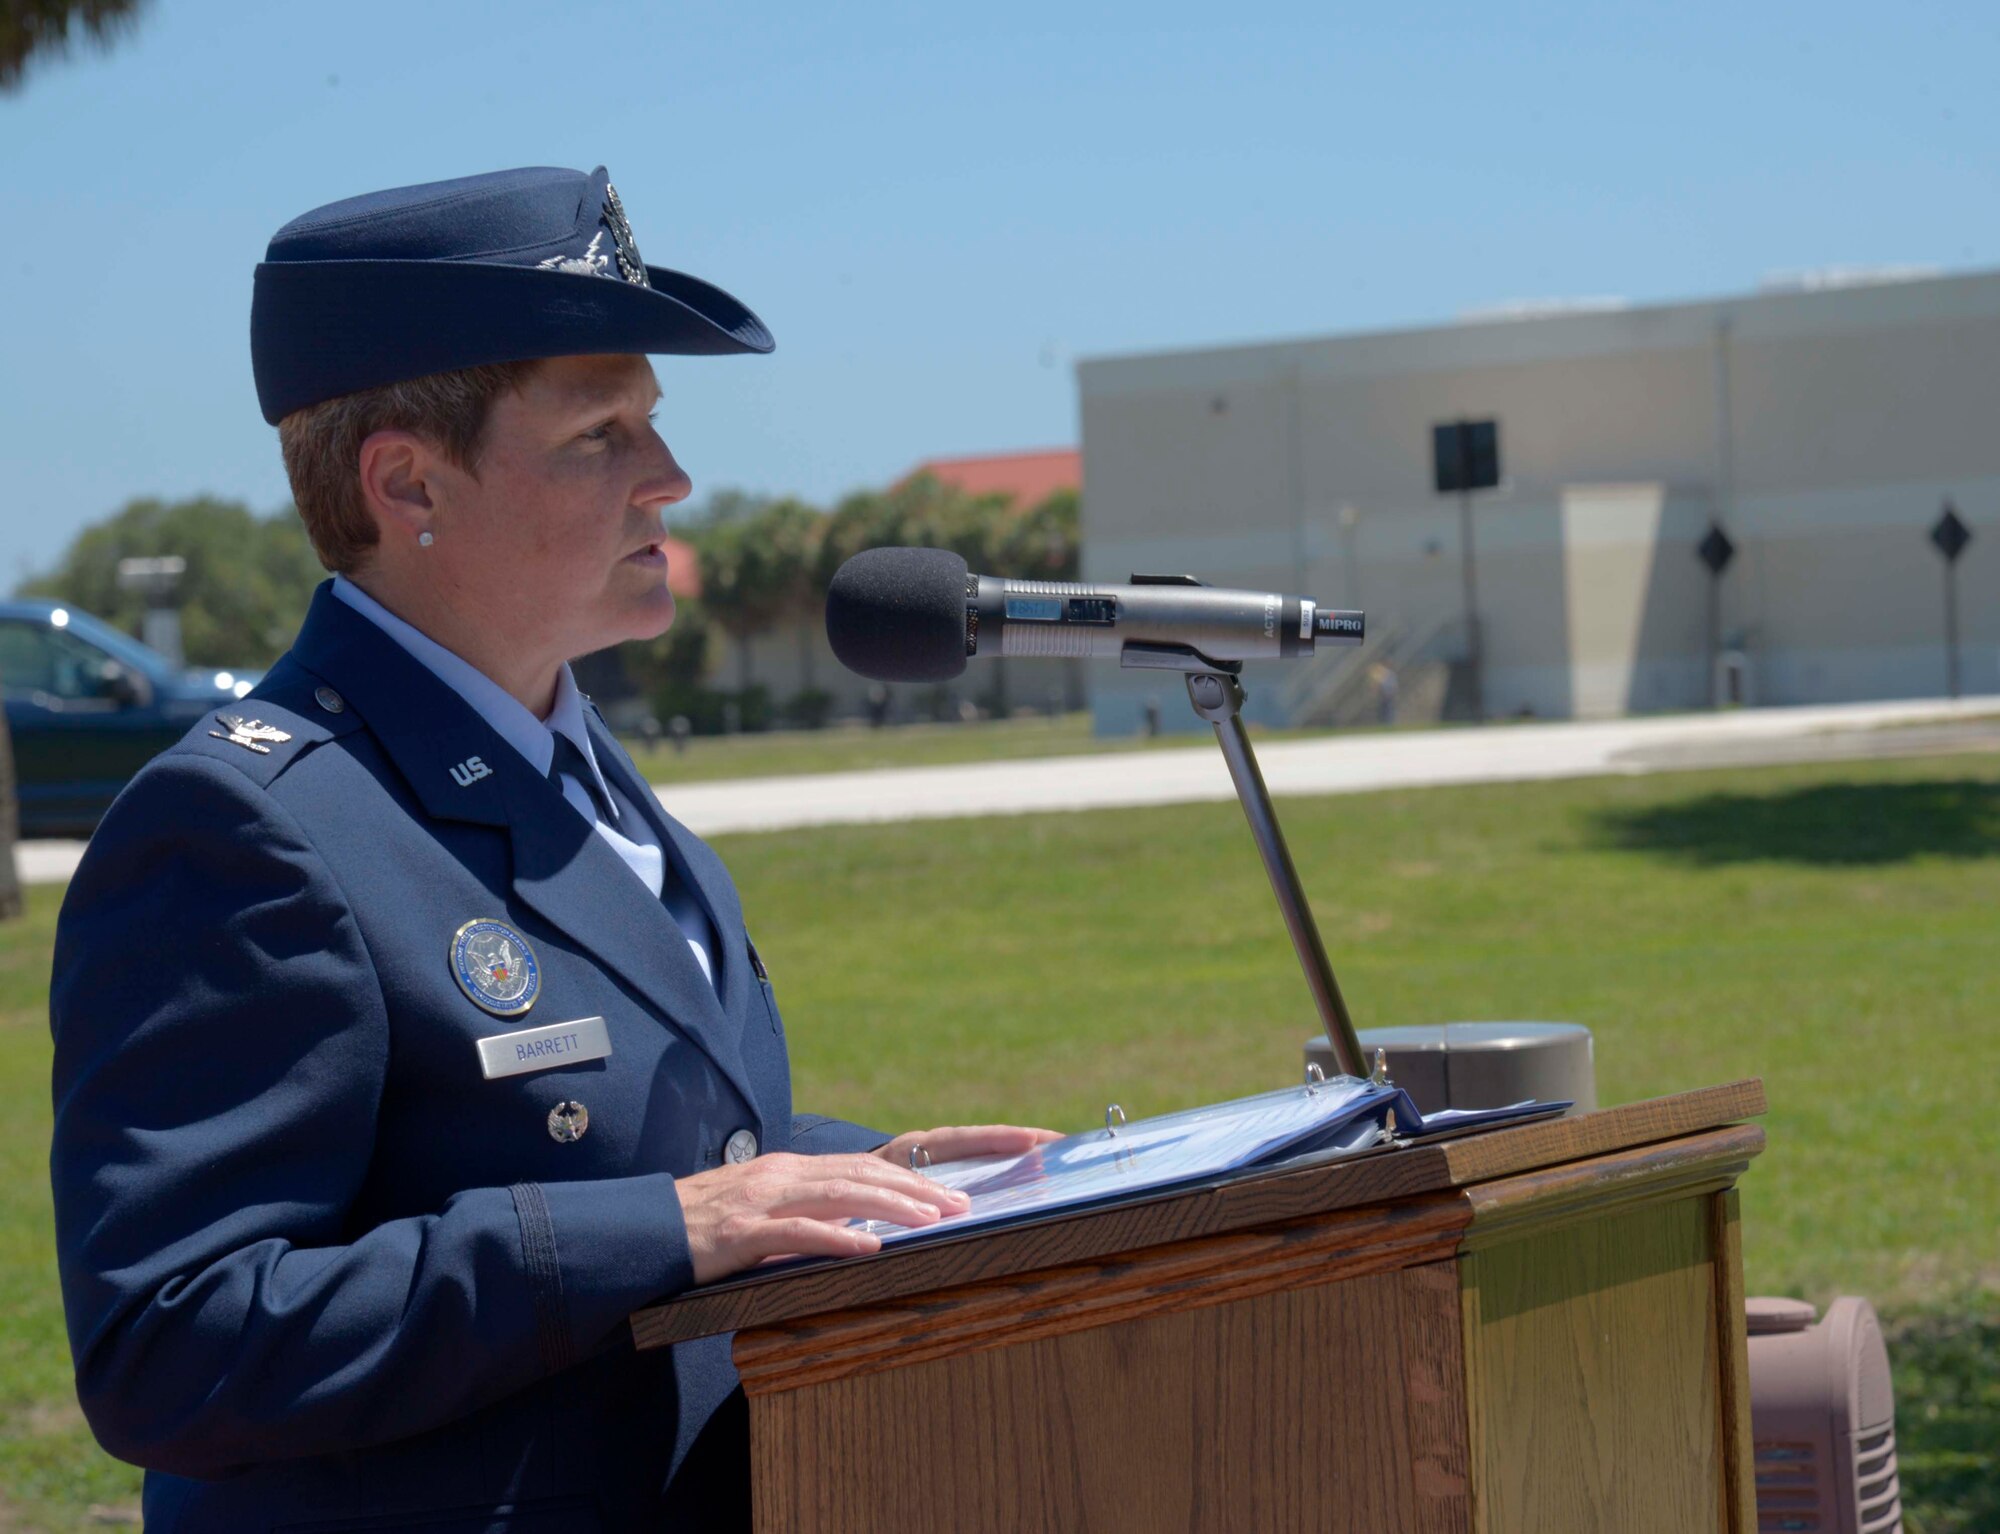 U.S. Air Force Col. Jennifer Barrett, vice commander of the 6th Air Mobility Wing, provides remarks during a Memorial Day ceremony at MacDill Air Force Base, Fla., May 26, 2017. The event was held prior to pay respect to fallen heroes prior to the holiday weekend. (U.S. Air Force photo by Staff Sgt. Vernon L. Fowler Jr.)